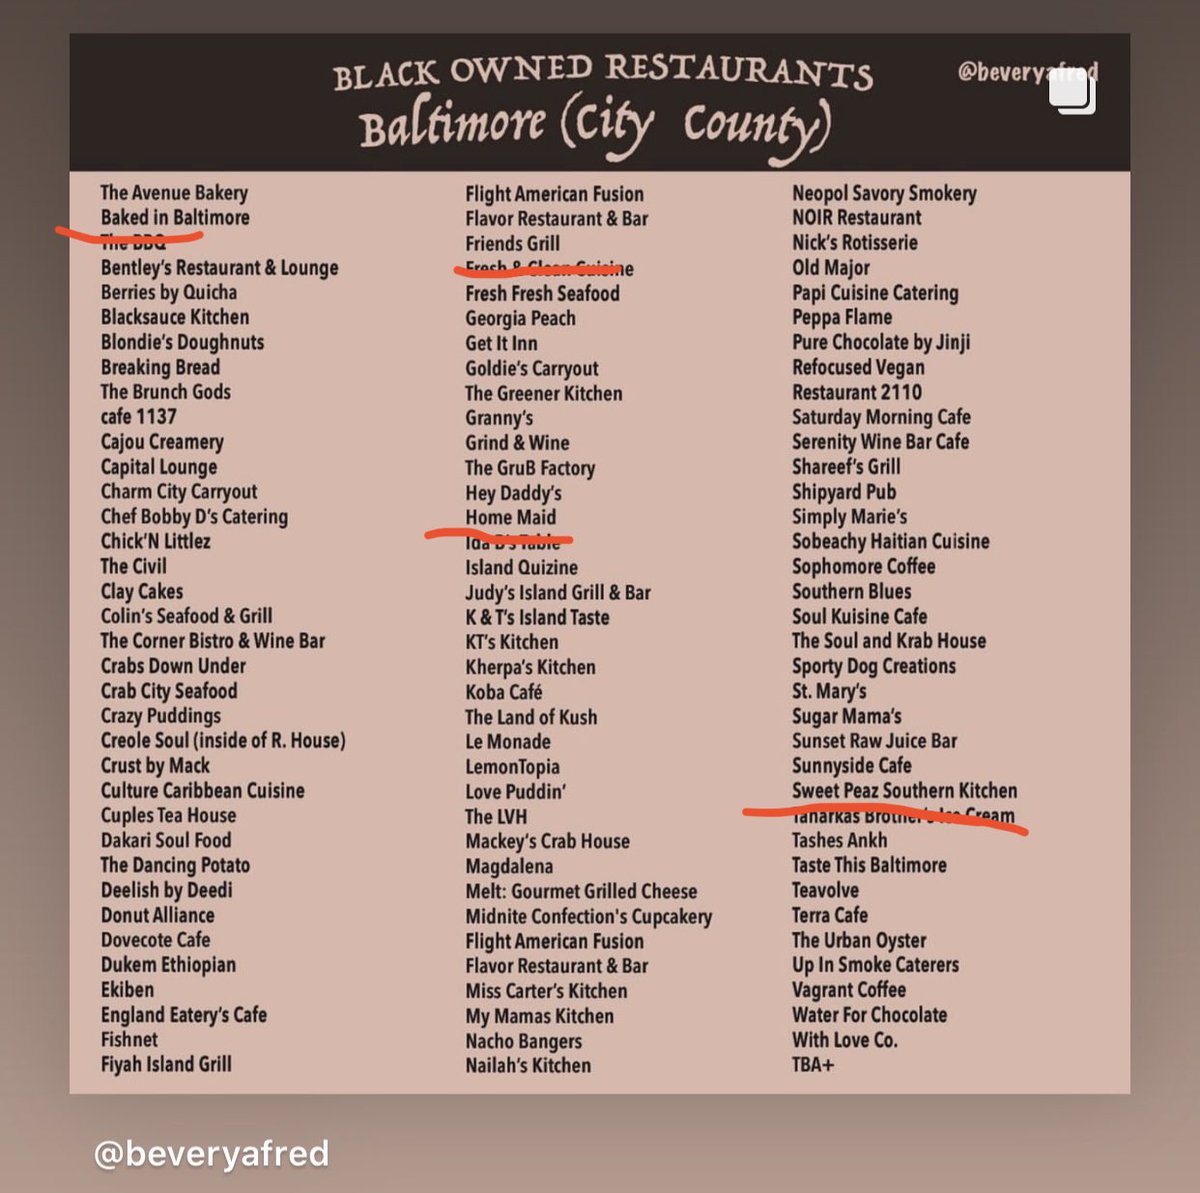 Done with this for now! Again these are the blk owned restaurants I’ve visited within the past 12ish mos. & had a good meal there. Here are 2 more complete lists than mine from  @arlisappetite &  @beveryafred. Scratched off spots that aren’t blkownd or that I know have closed down